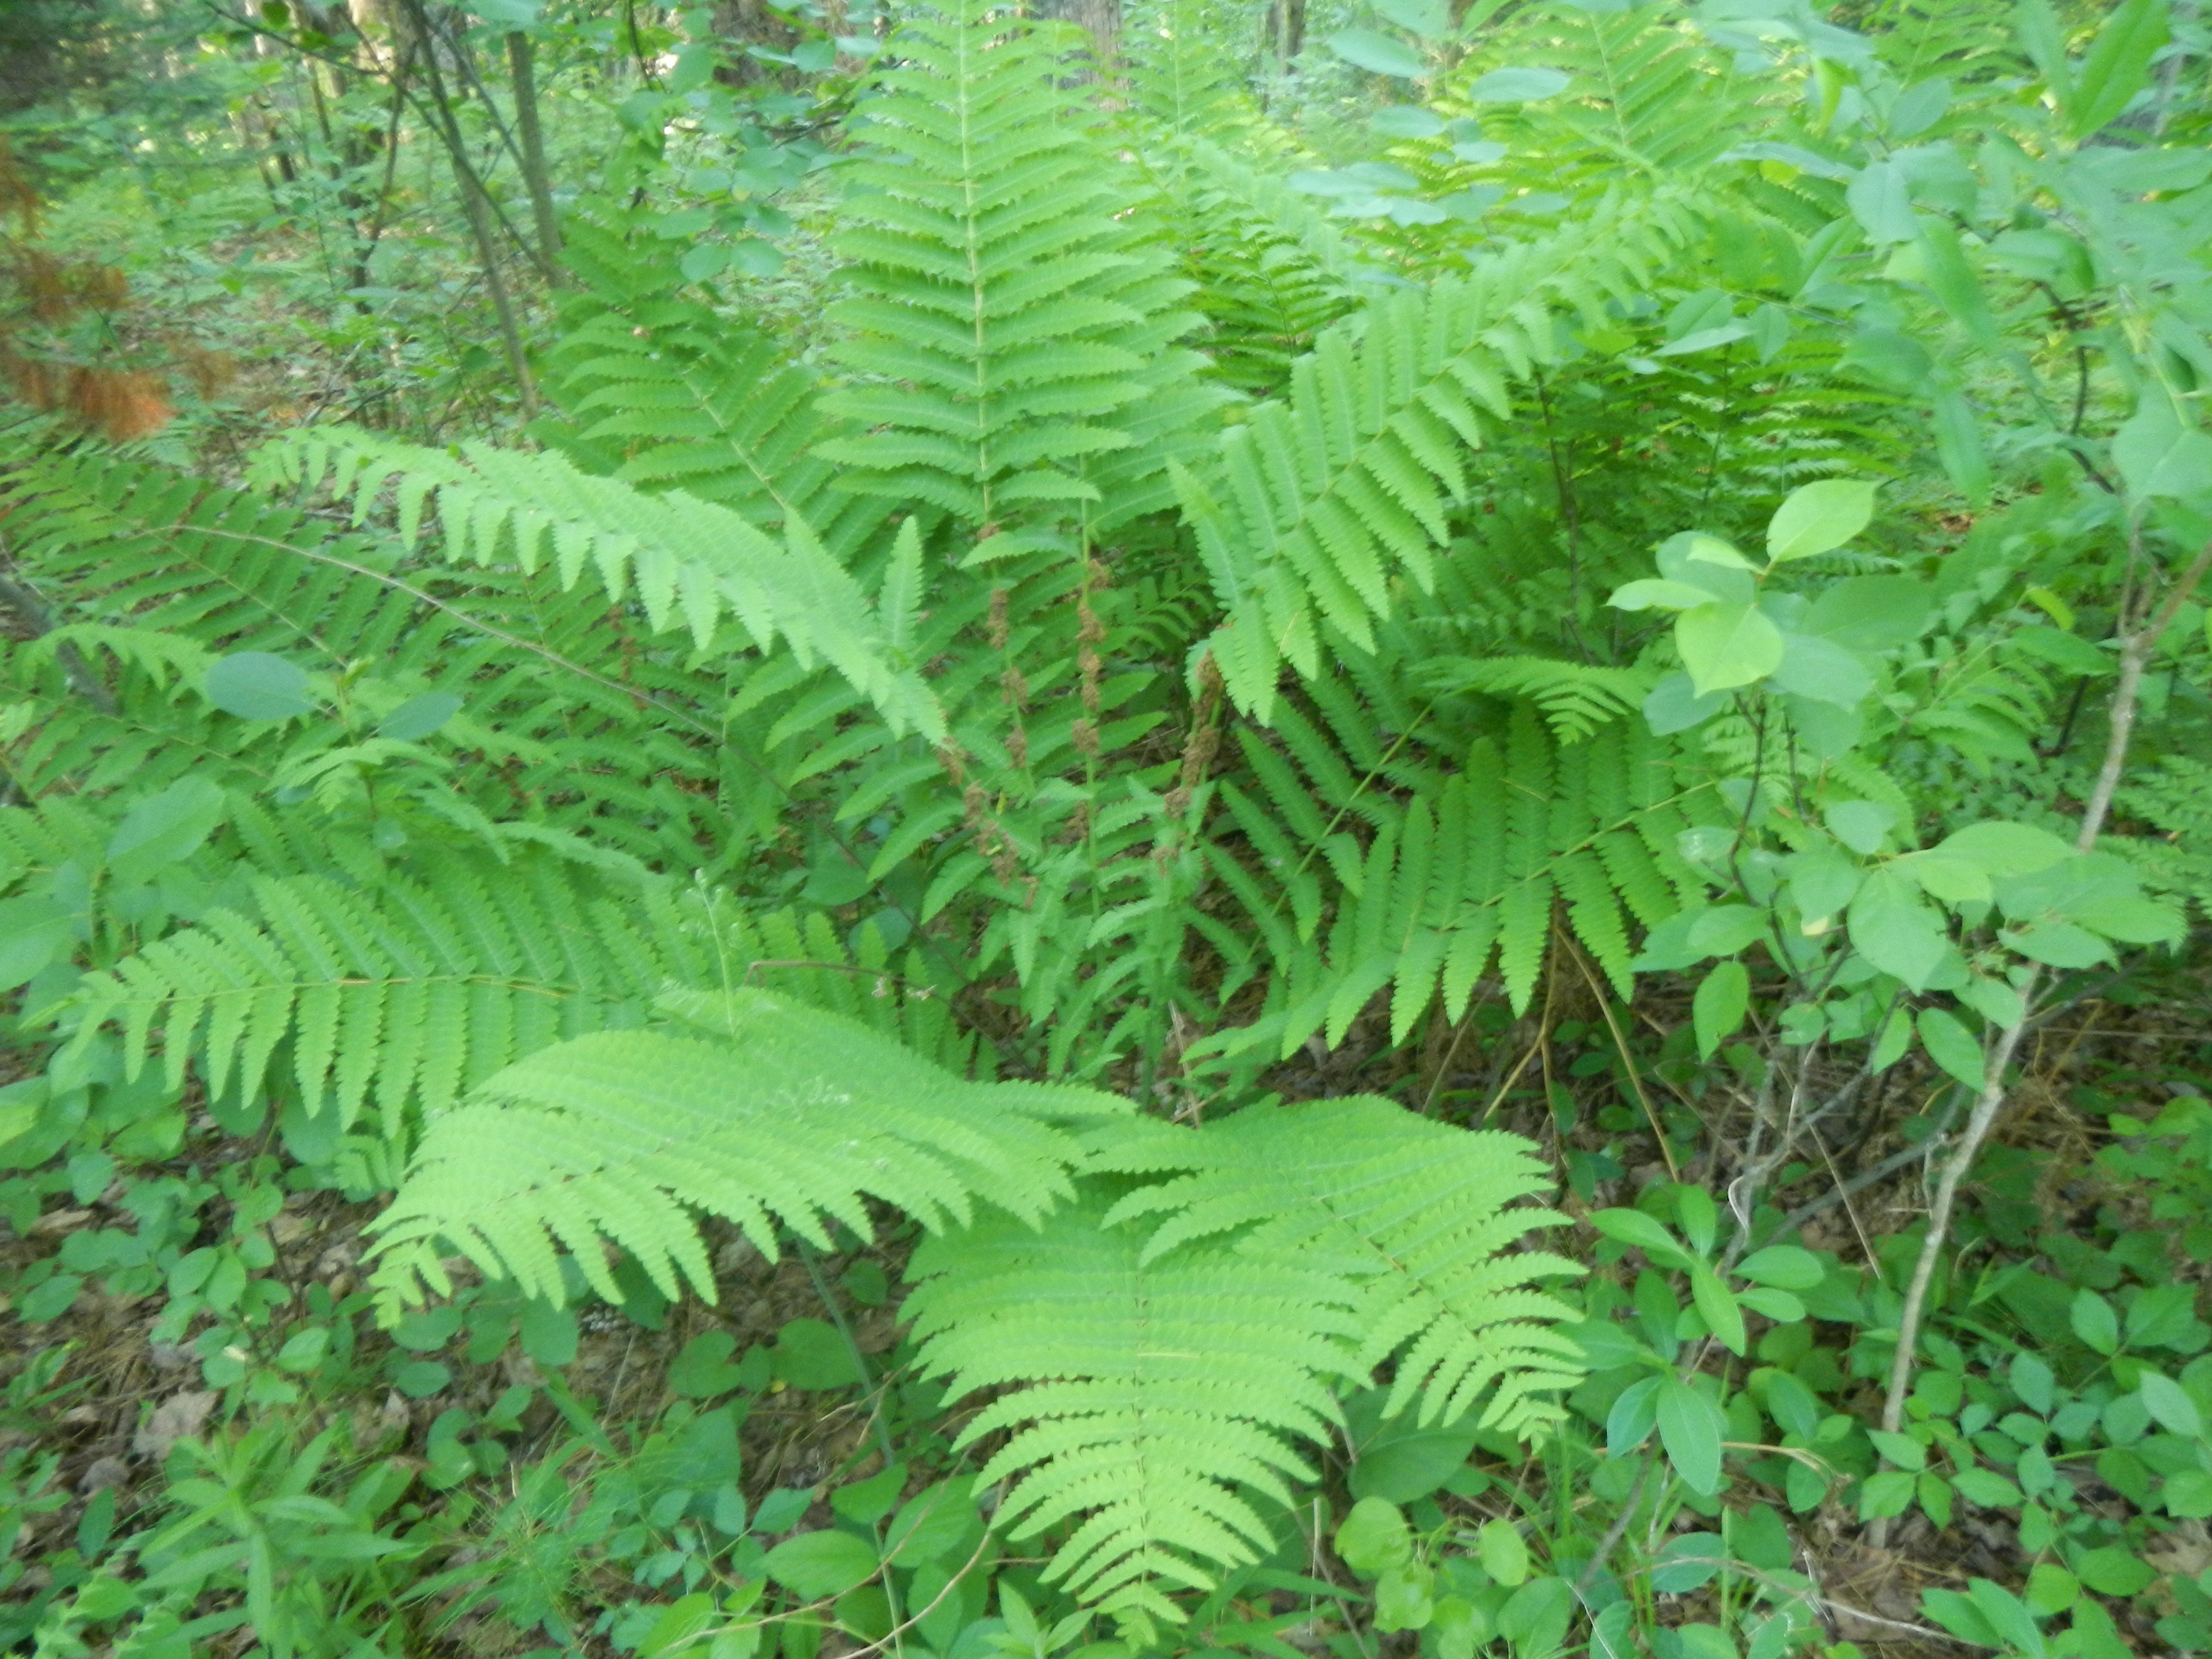 Interrupted fern, Osmunda claytoniana - the brown things in the middle of the fronds are fertile pinnules where spores are produced